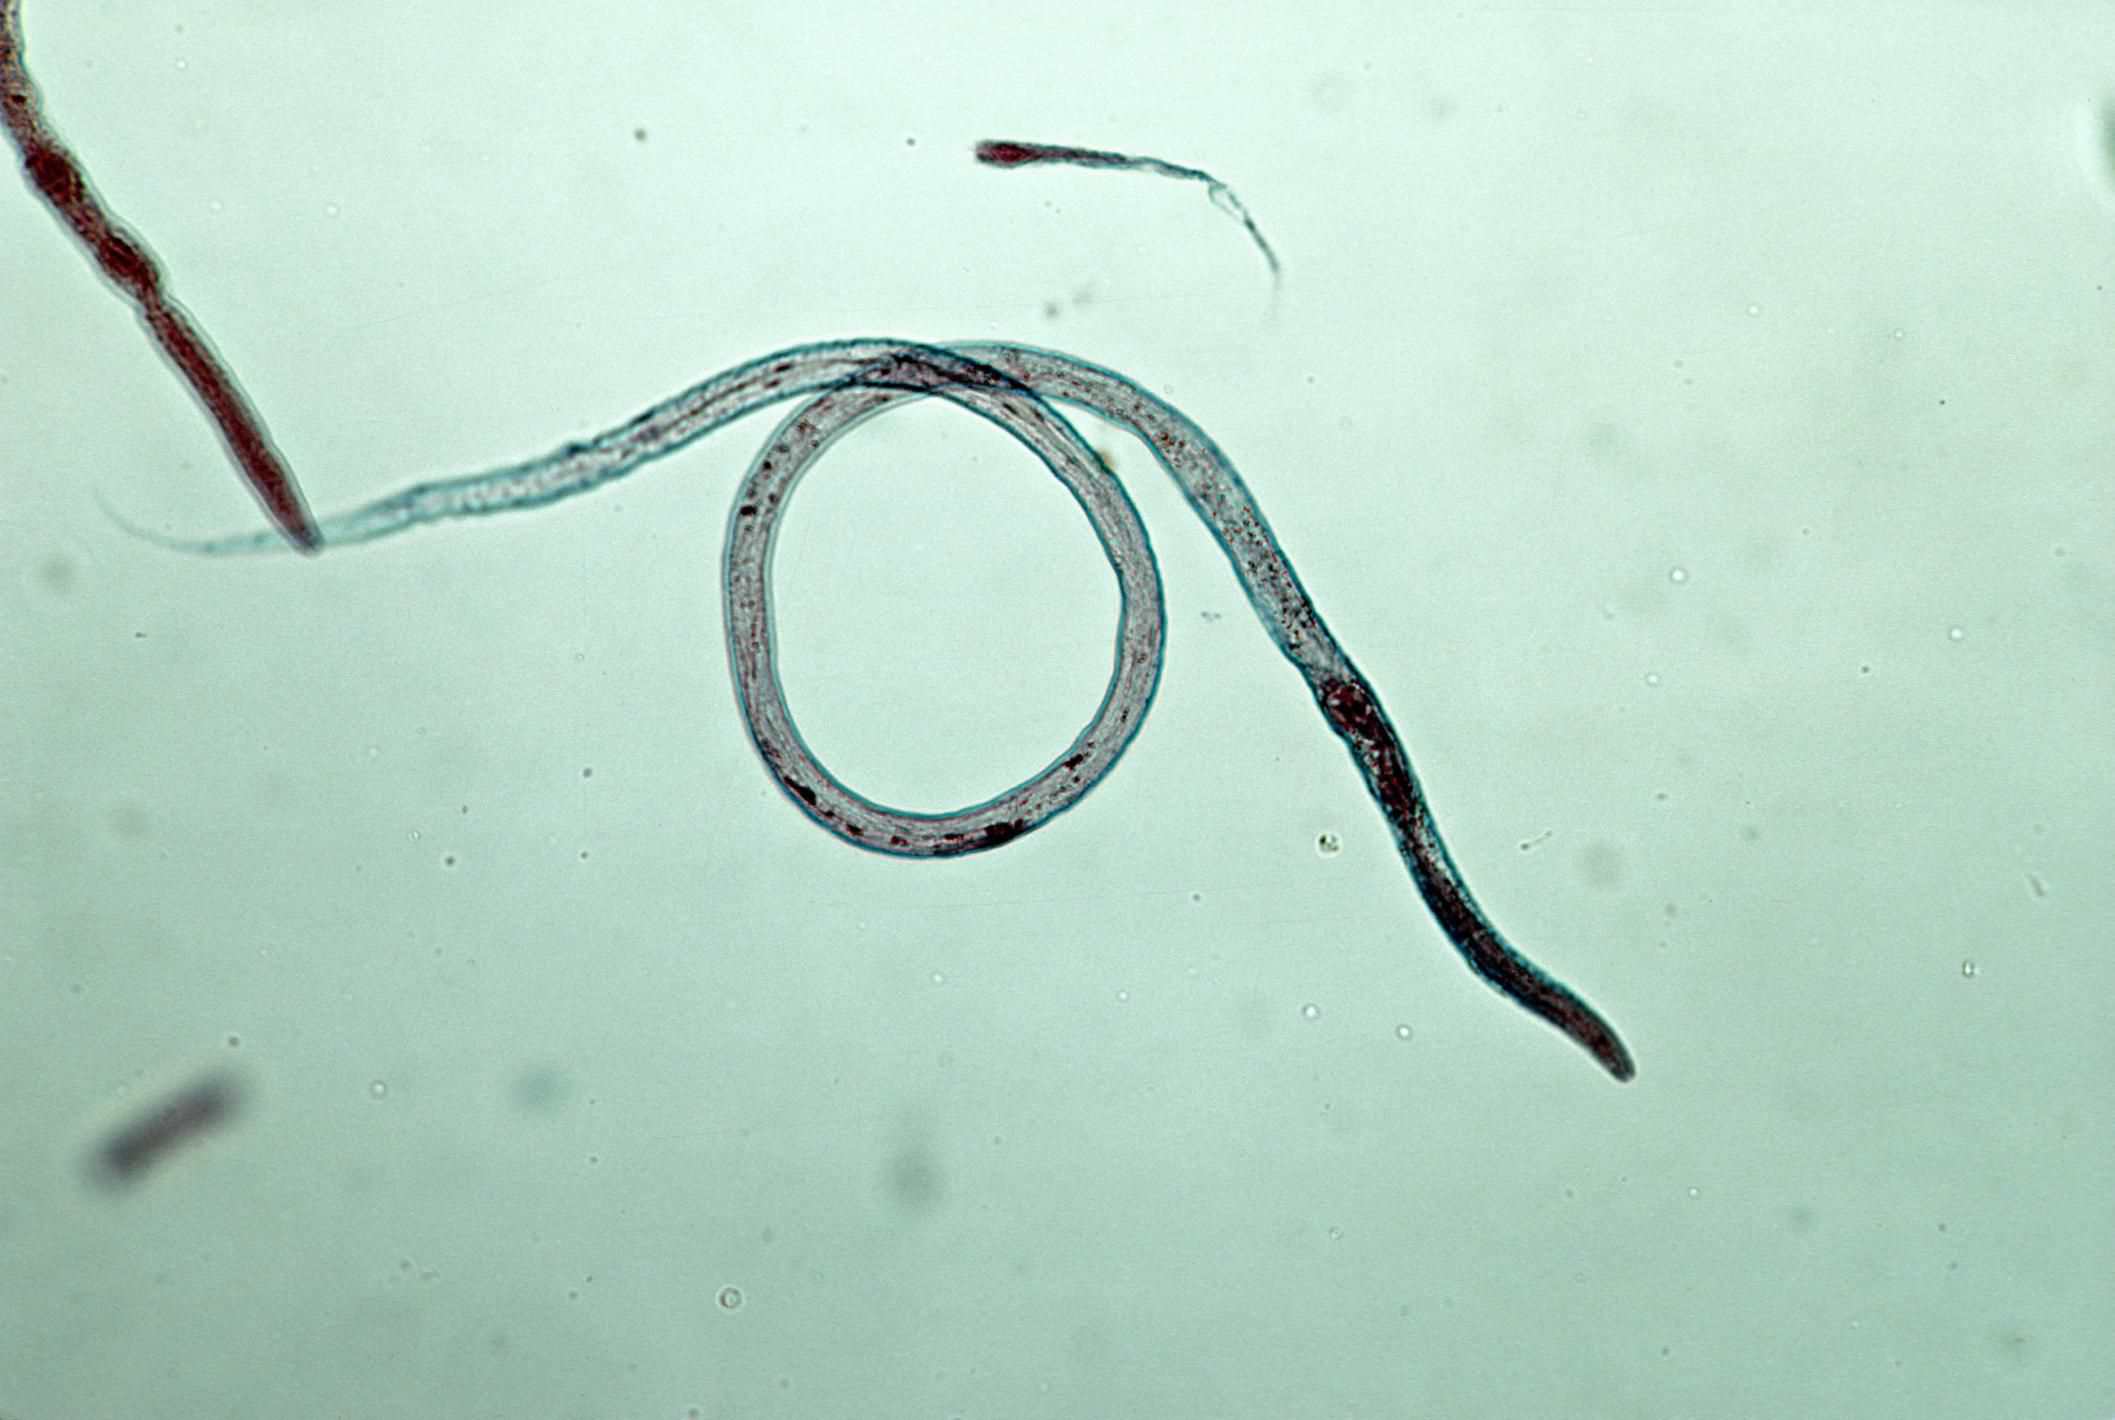 Roundworms (Toxocara canis) from a dog by Flukeman / Wikimedia Commons